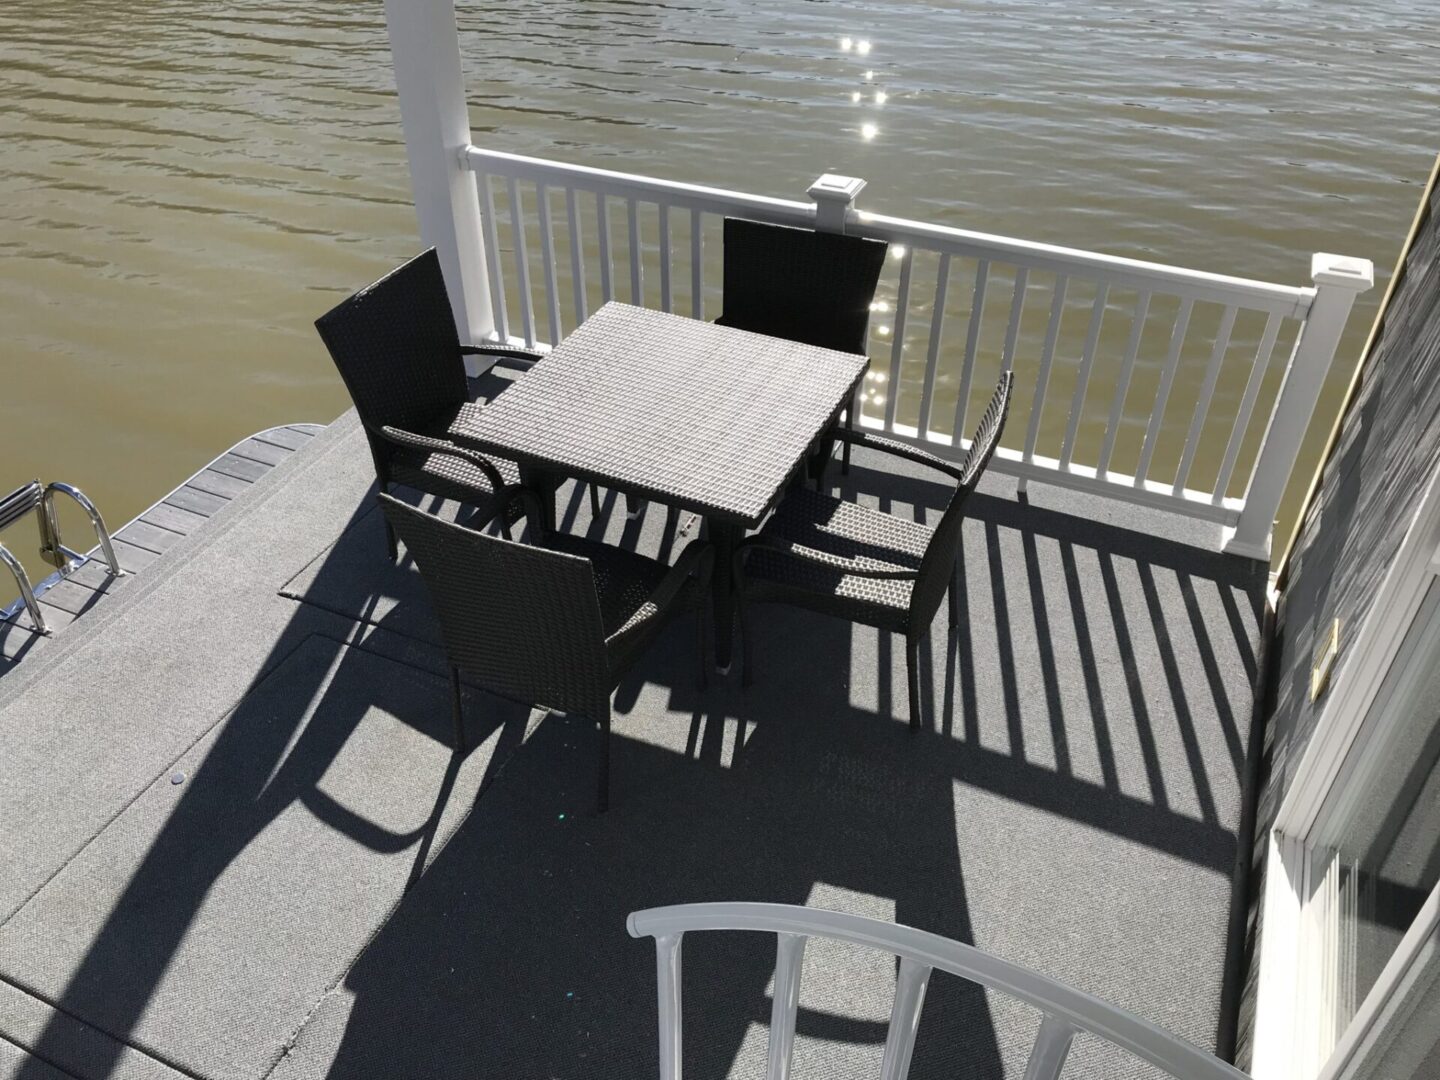 A black woven dining set in the stern area of a houseboat